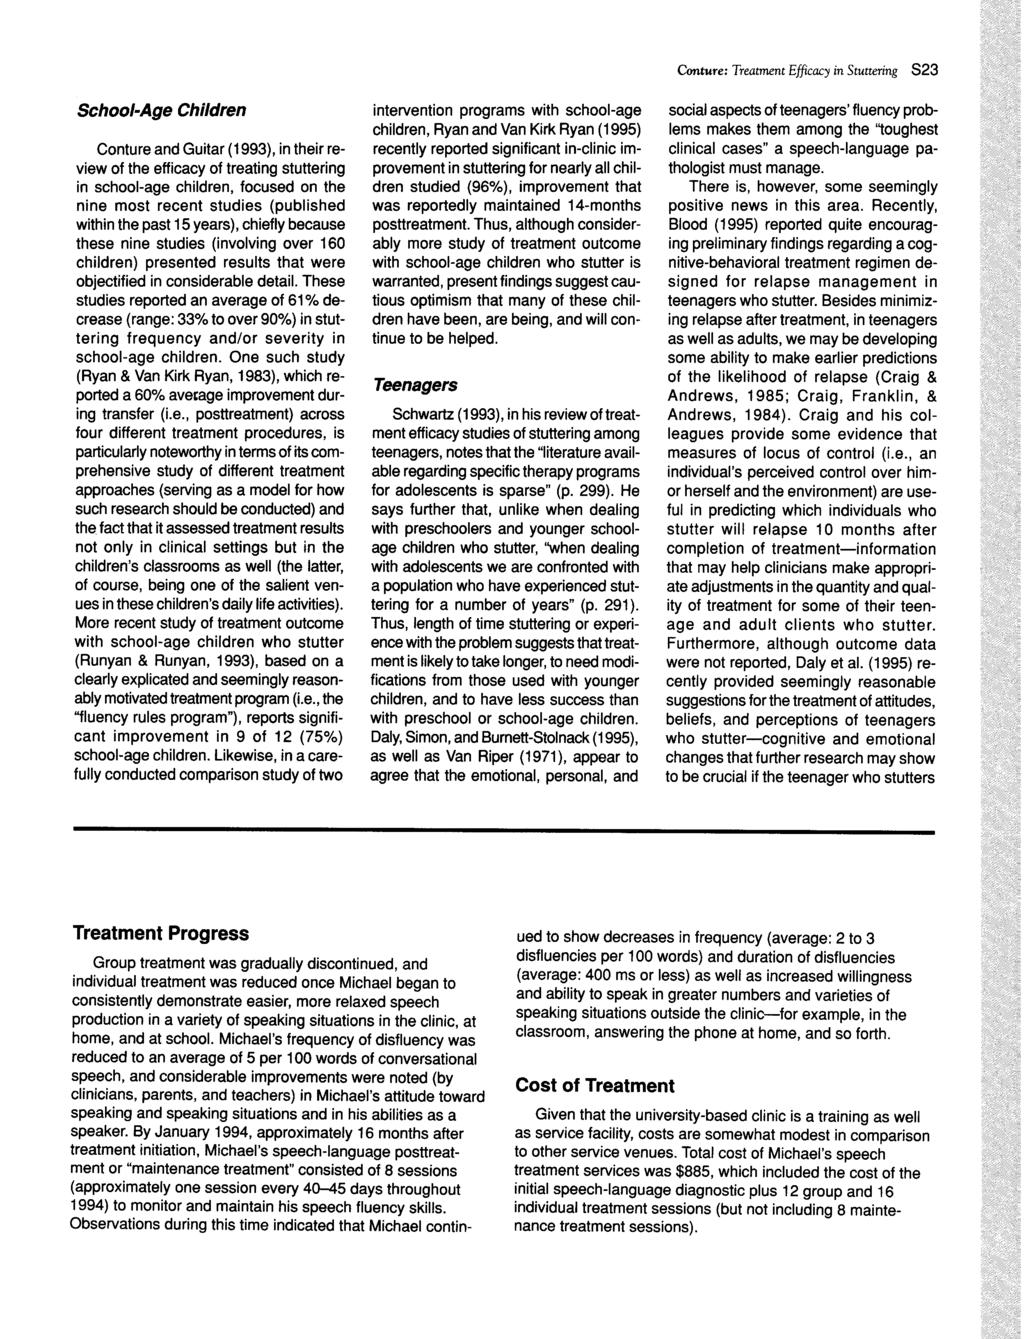 School-Age Children Conture and Guitar (1993), in their review of the efficacy of treating stuttering in school-age children, focused on the nine most recent studies (published within the past 15